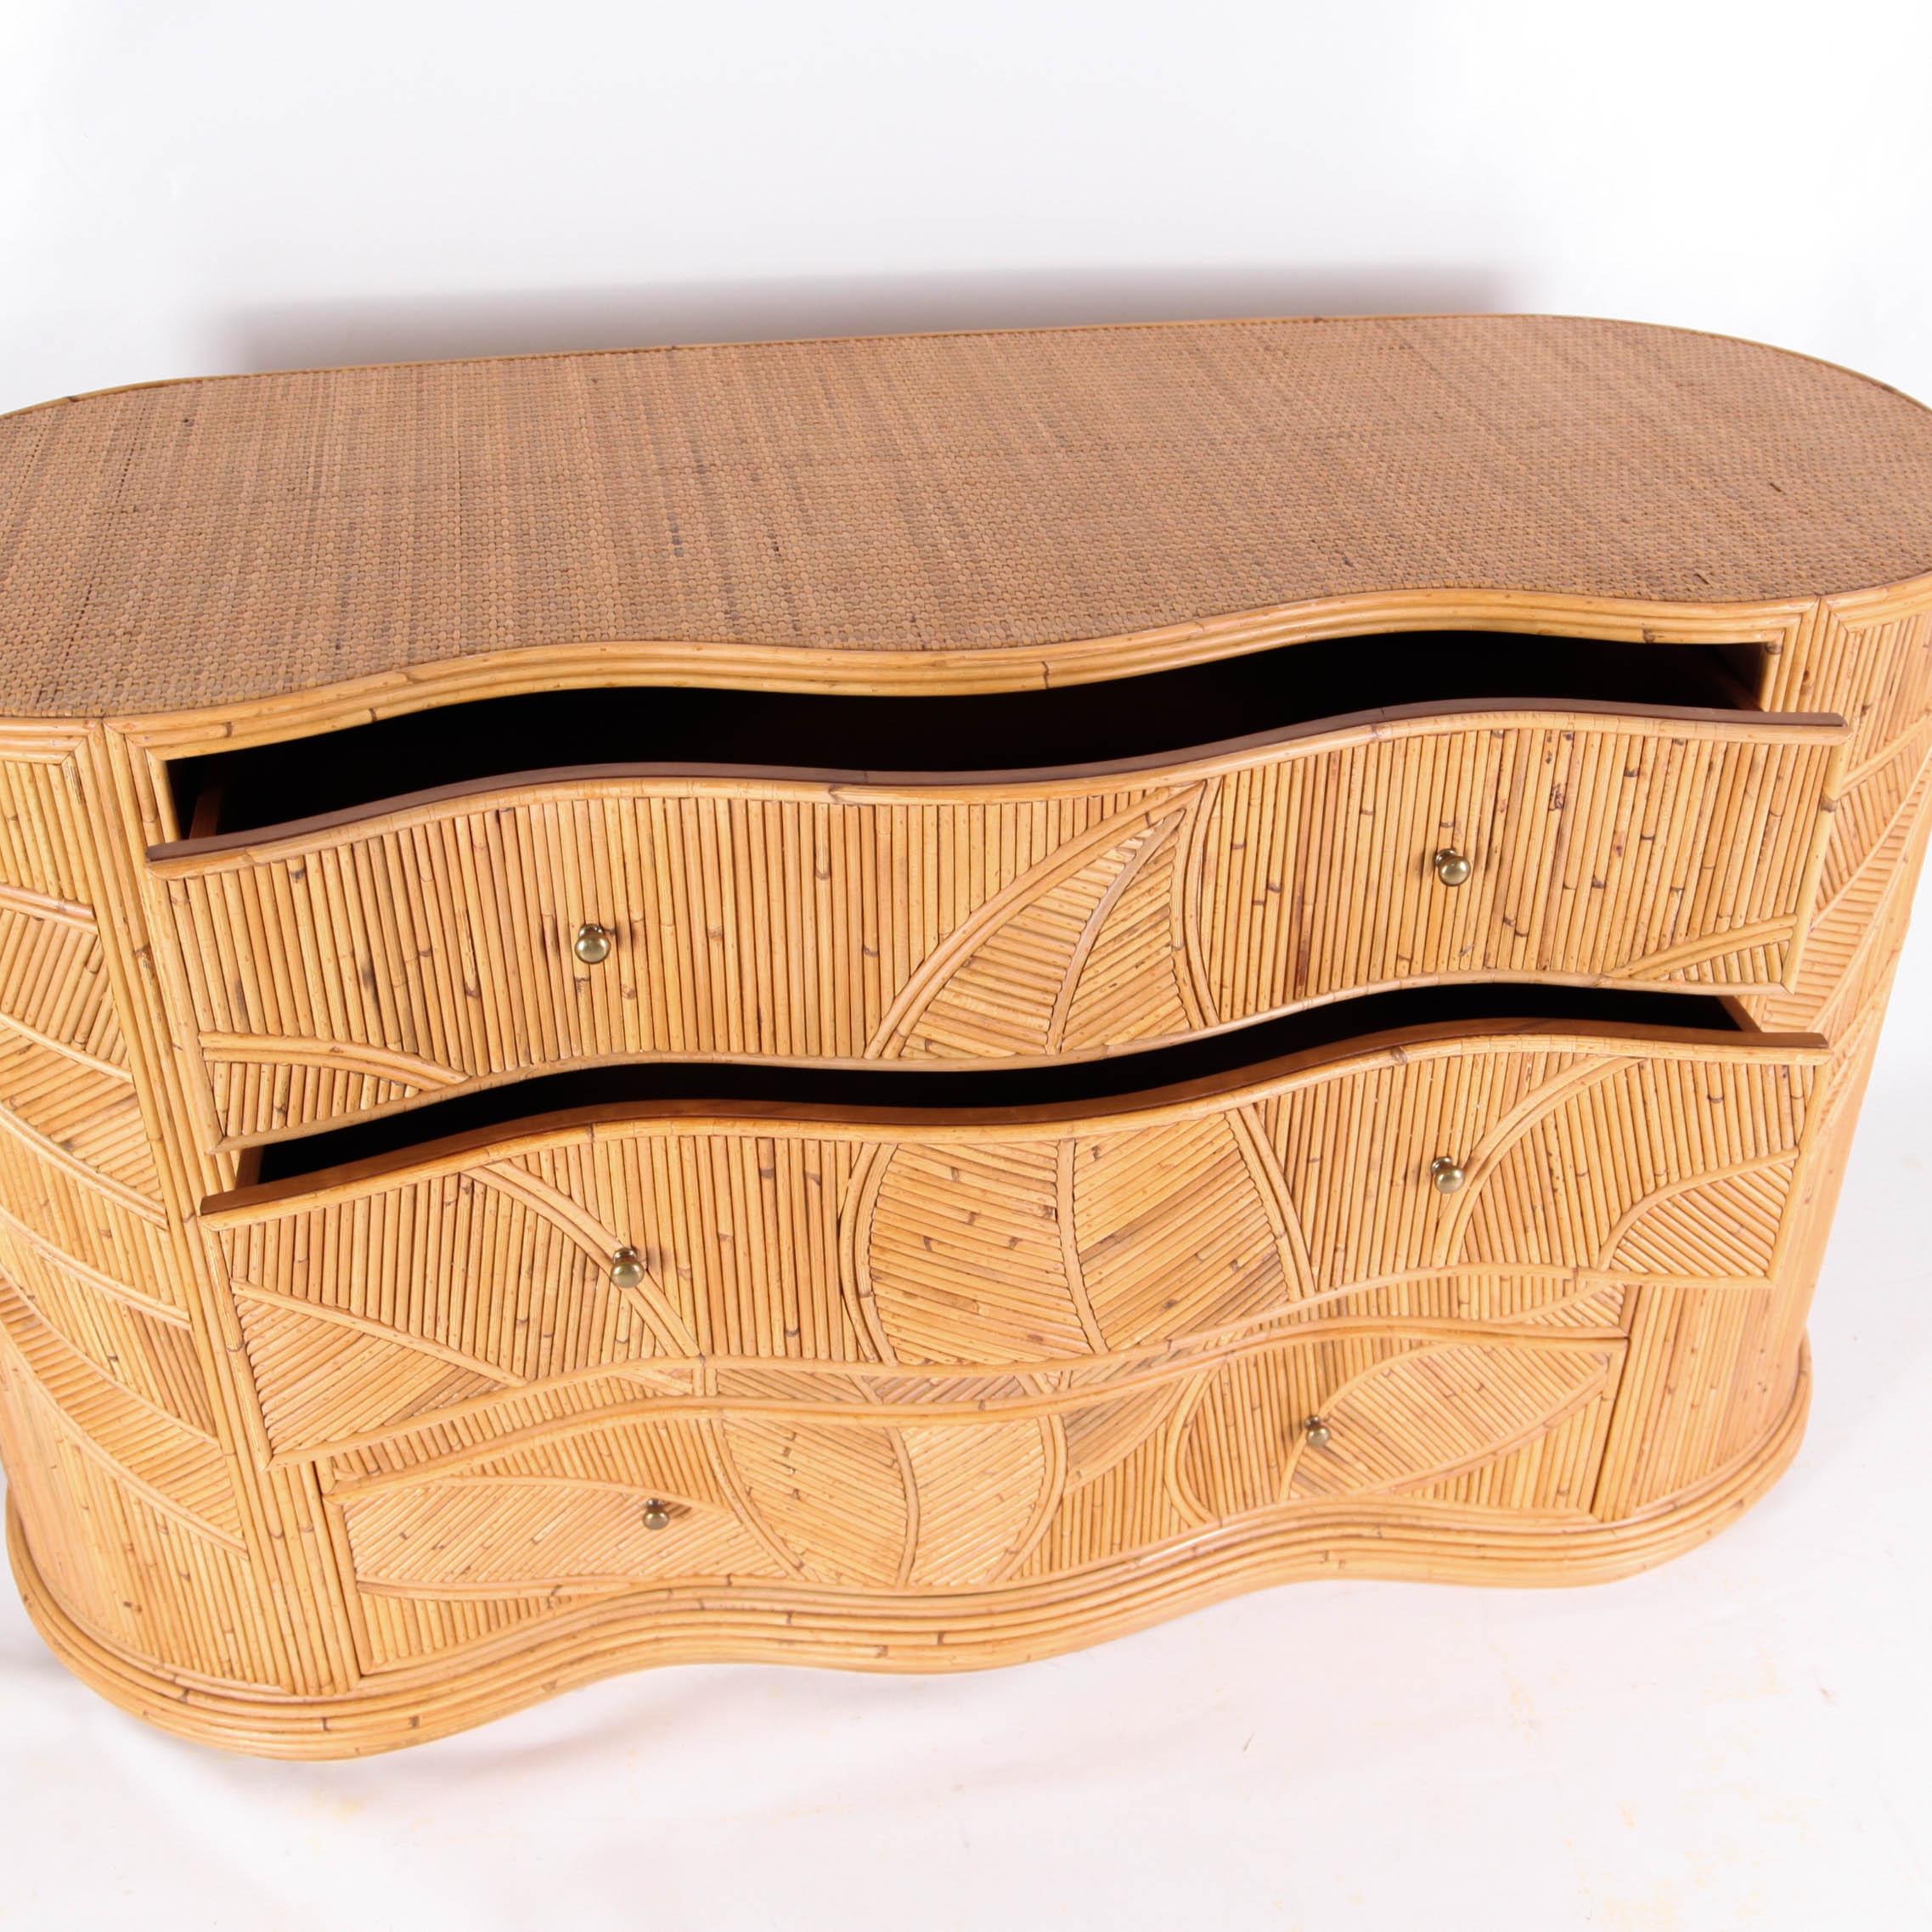 Chest of Drawers in Natural Rattan In Excellent Condition For Sale In Isle Sur Sorgue, FR